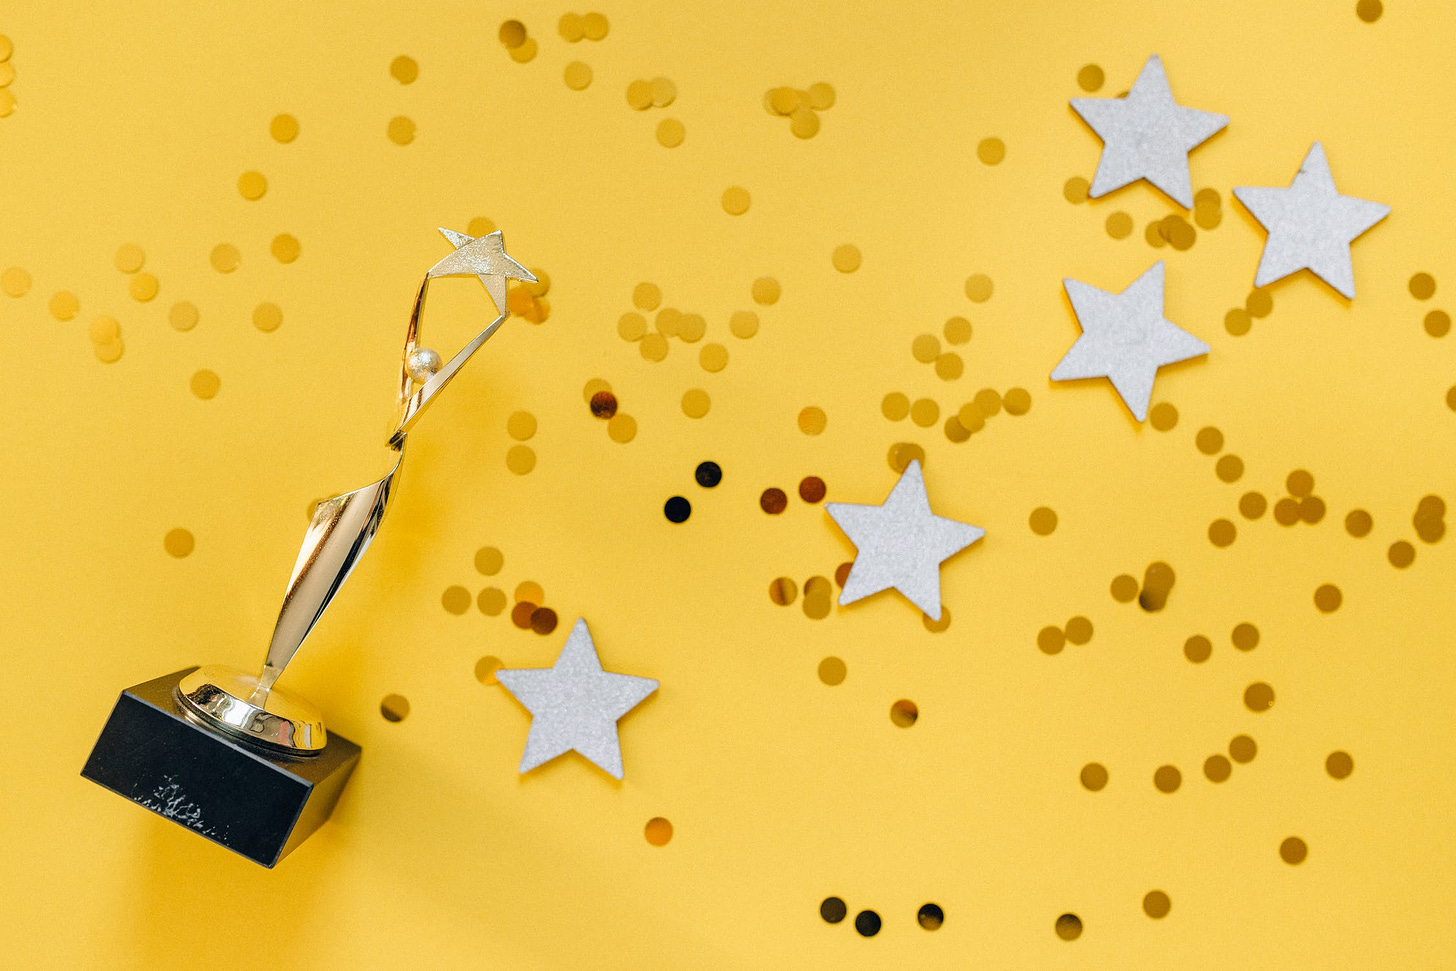 Gold trophy against yellow background with four stars and gold confetti.